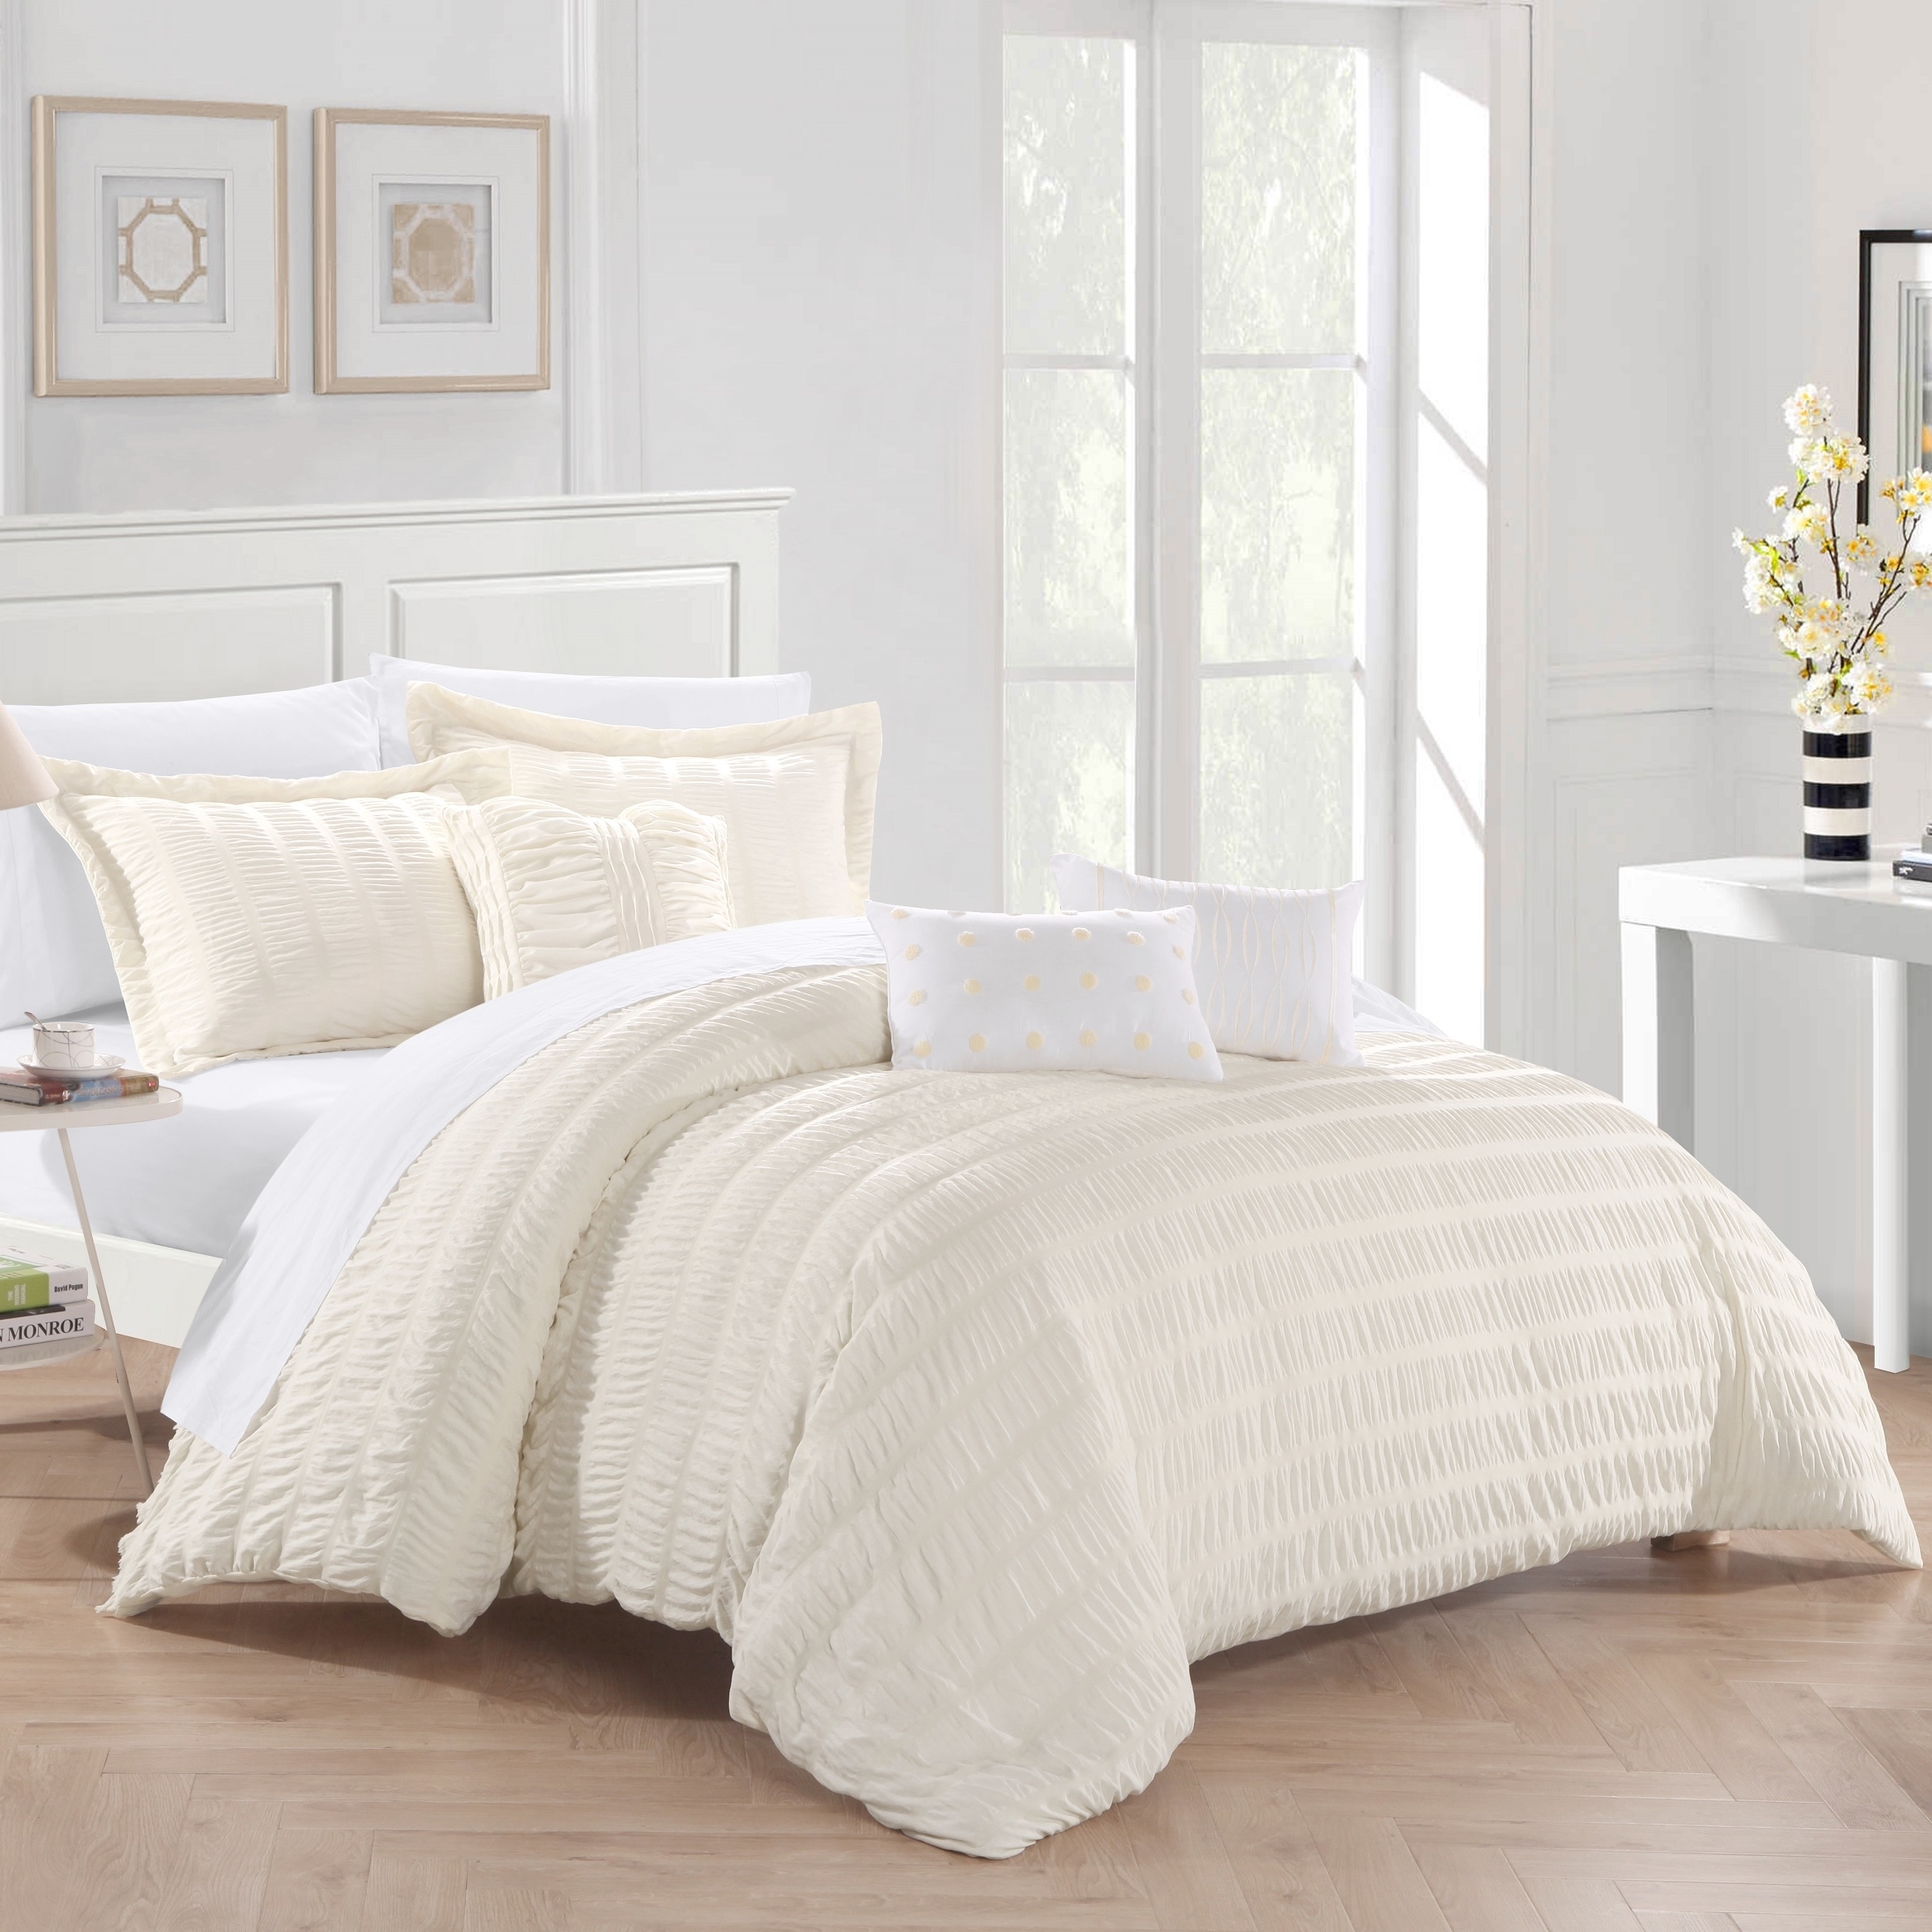 Daza 6 Or 5 Piece Comforter Set Striped Ruched Ruffled Bedding - Beige, Twin